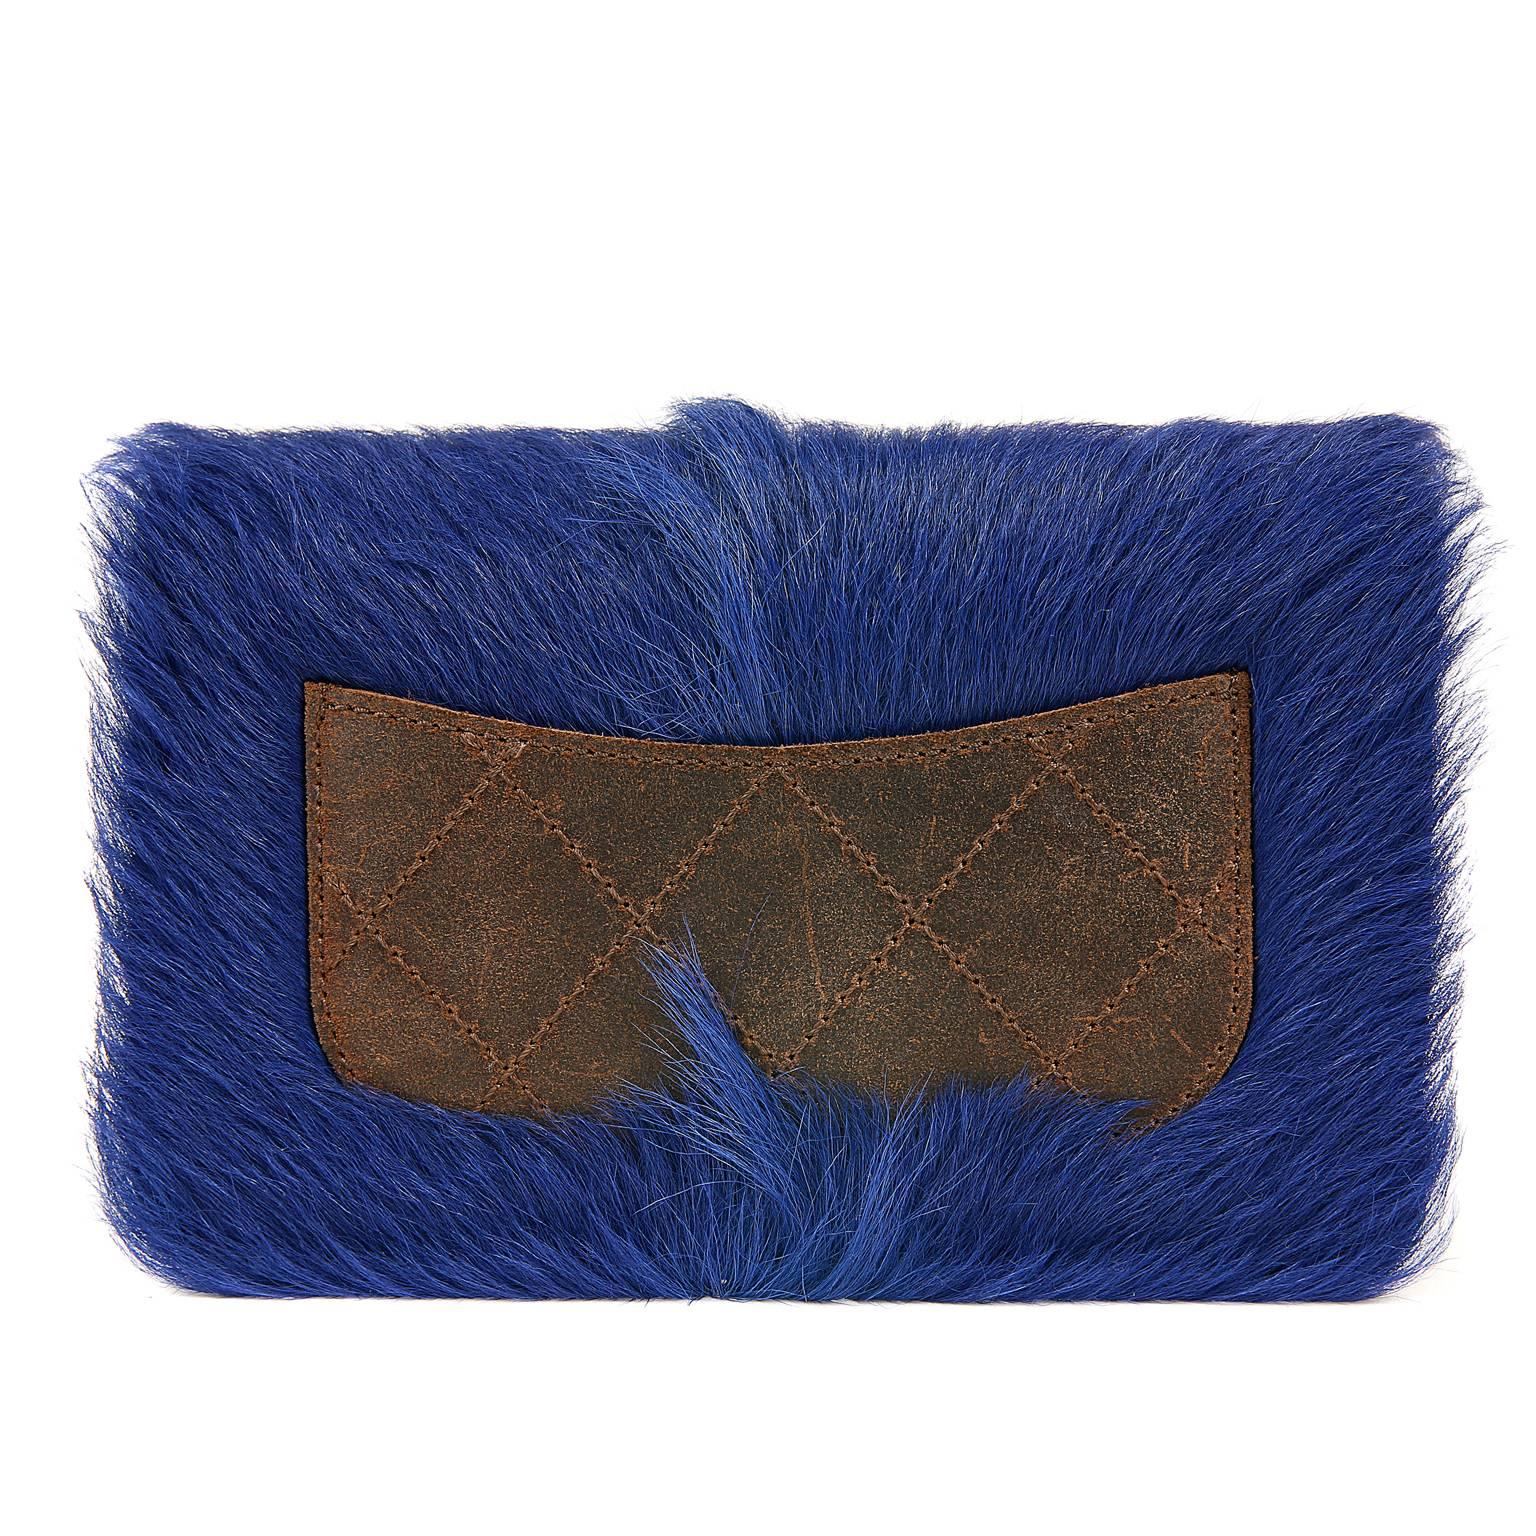 Chanel Blue Fur Wallet on a Chain- PRISTINE
  From the 2013 Paris- Edinburgh Runway collection, this stand out piece is a must have for collectors.

Nearly neon blue goat fur combines beautifully with distressed brown leather which surrounds the